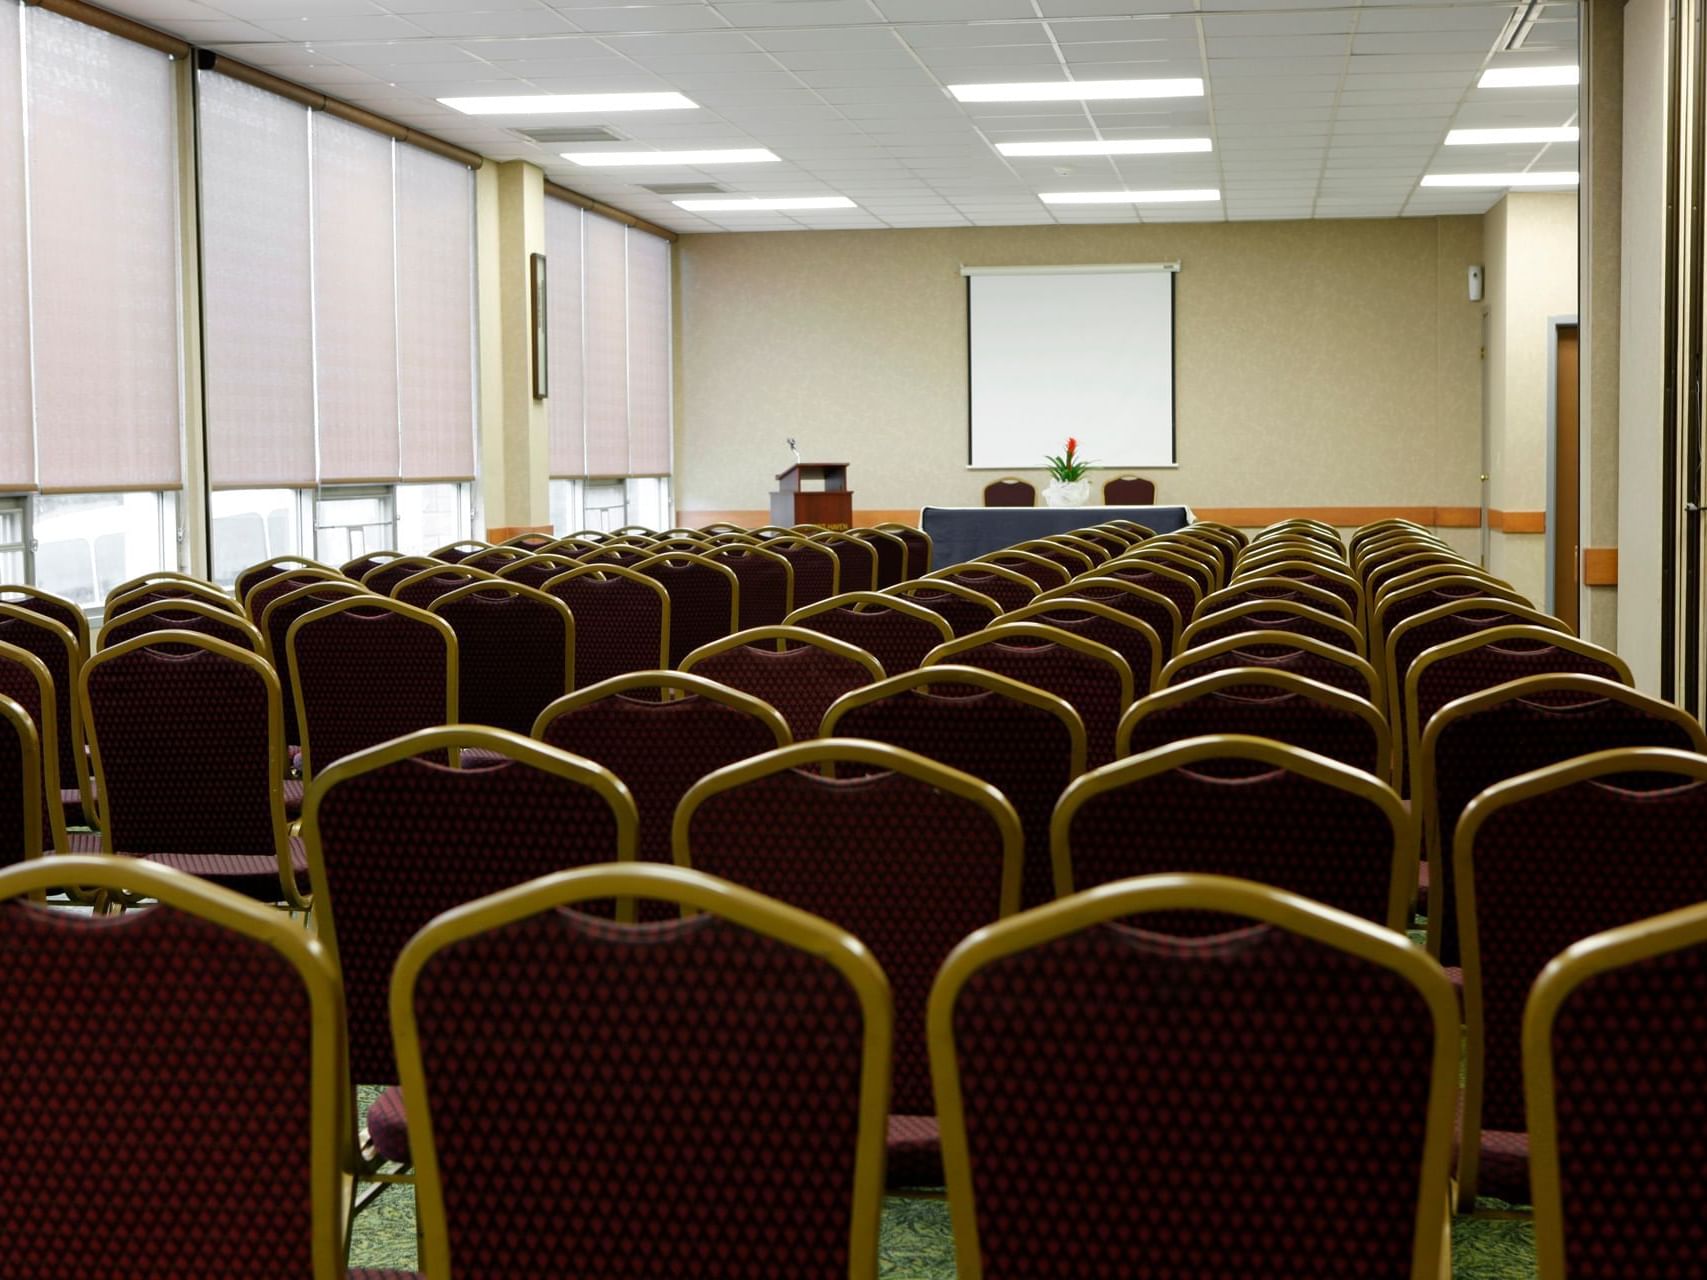 Chairs set up for a conference